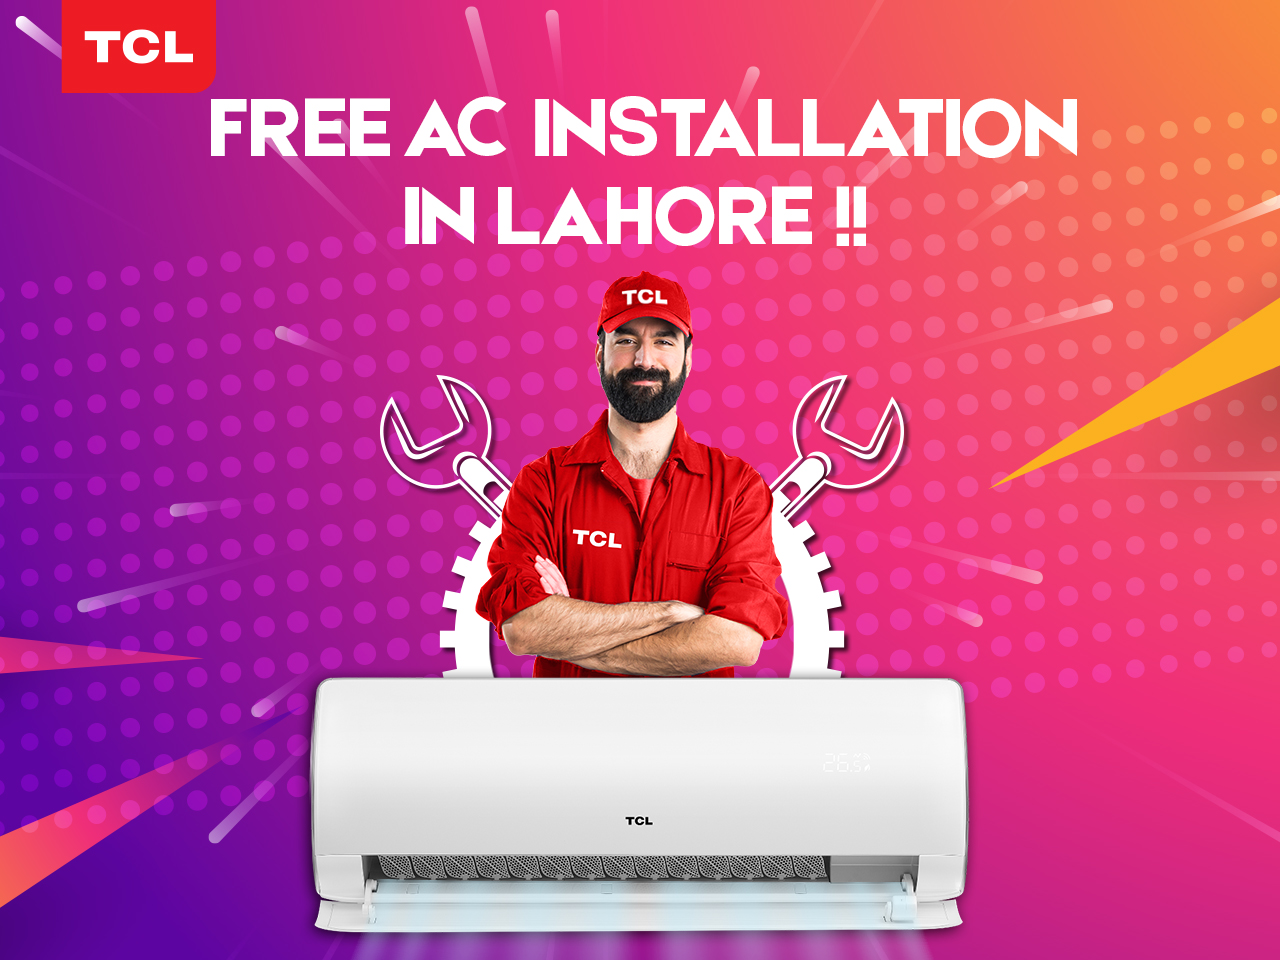 Summers Just Got Cooler in Lahore, TCL Offers Free AC Installation